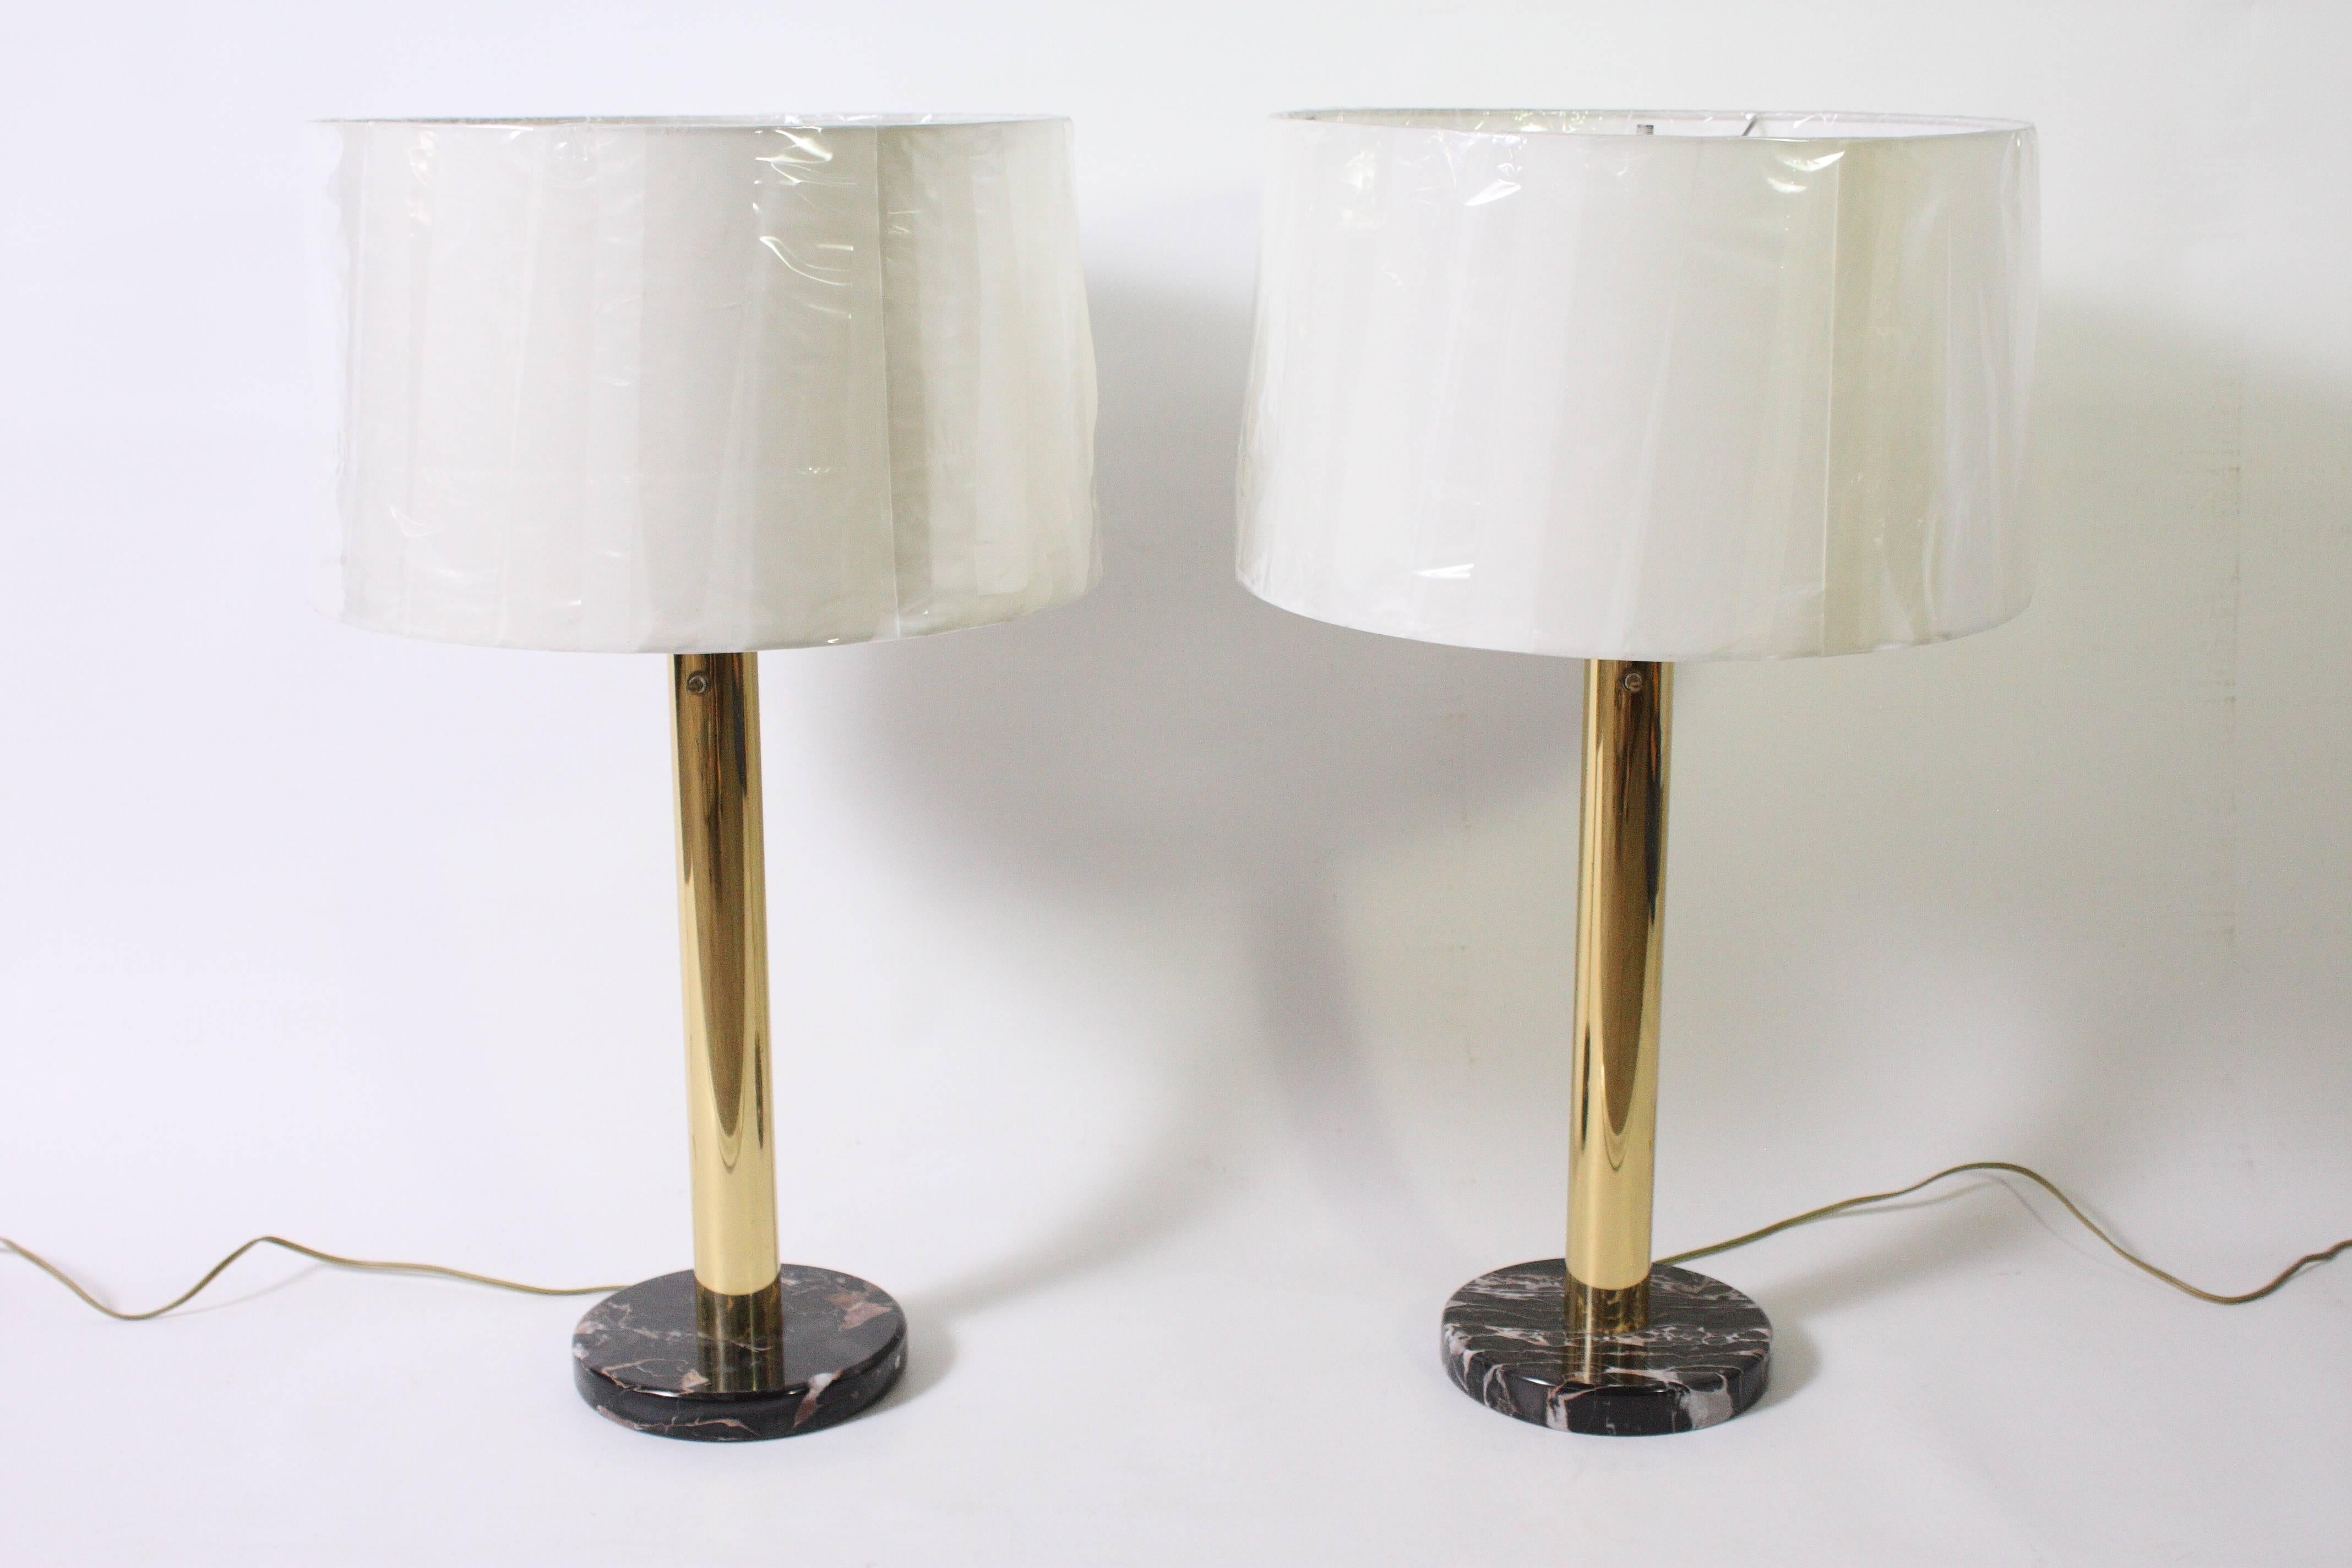 Gorgeous pair of brass and dark marble table lamps by Nessen Lighting. (shades not included). From the curated collection Space 20th Century Modern.